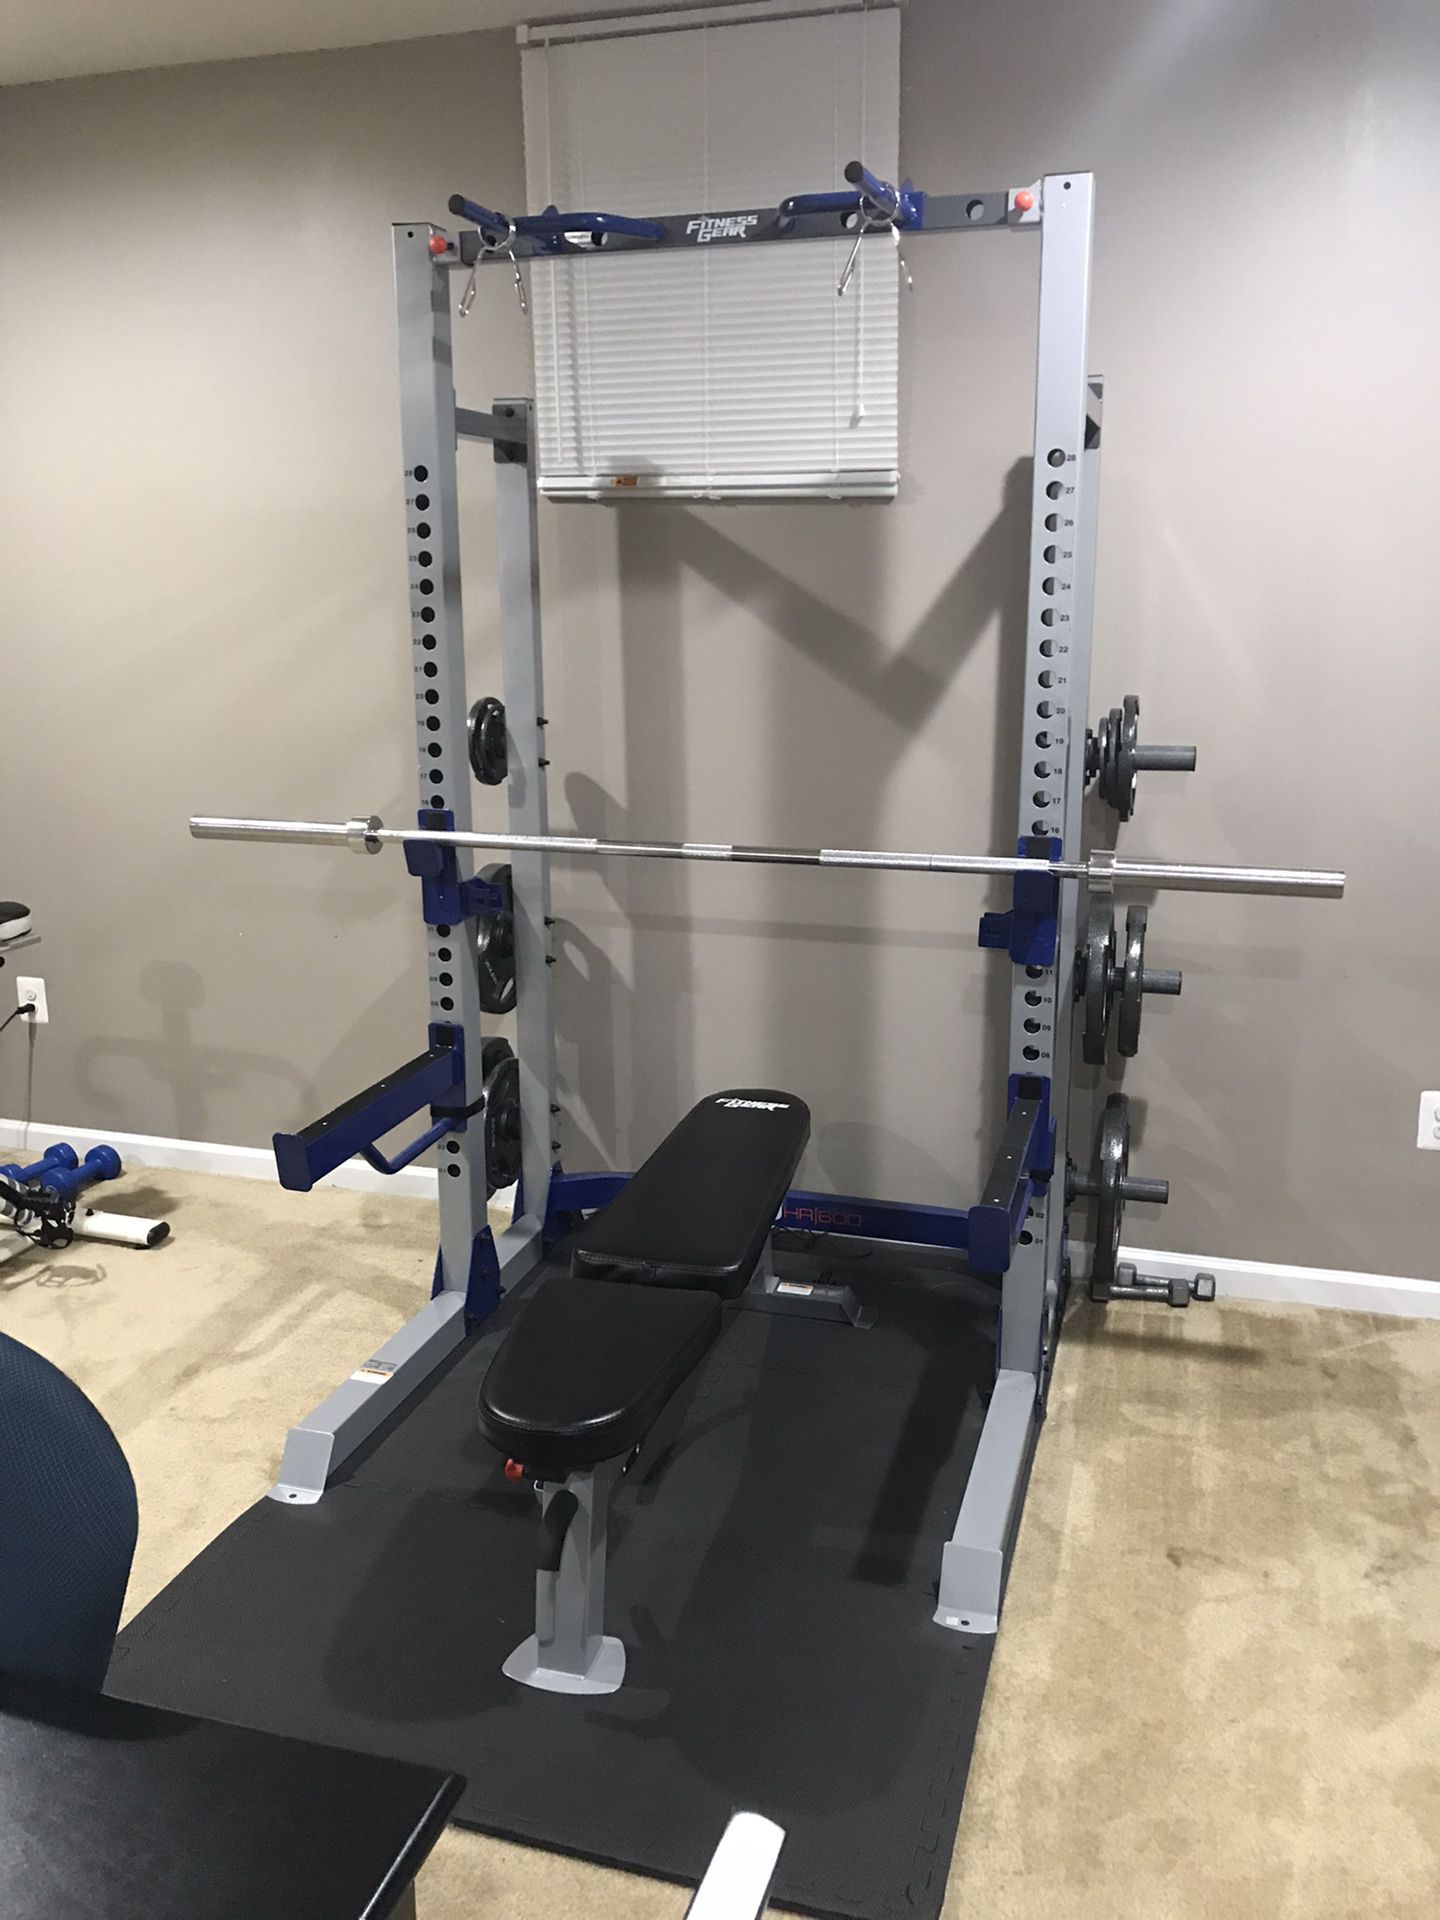 Complete Weights Setup